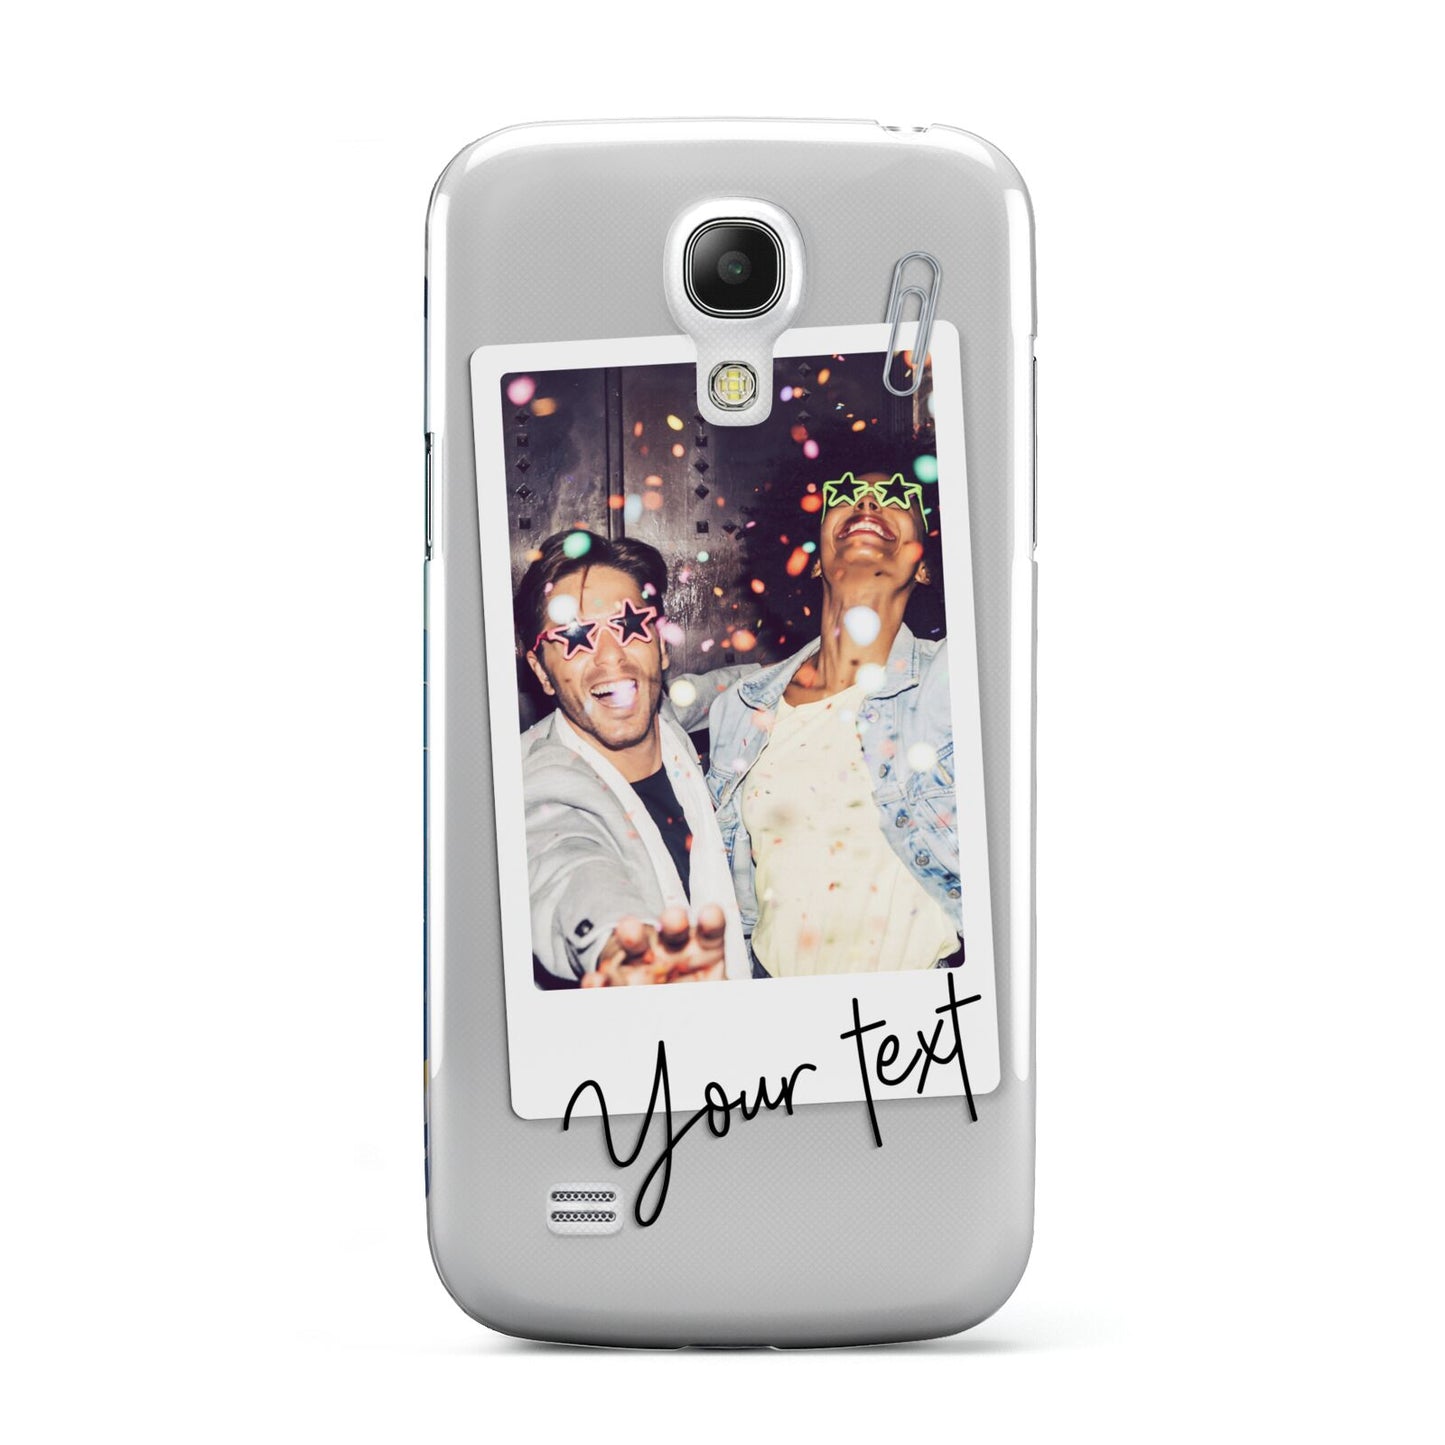 Personalised Photo with Text Samsung Galaxy S4 Mini Case